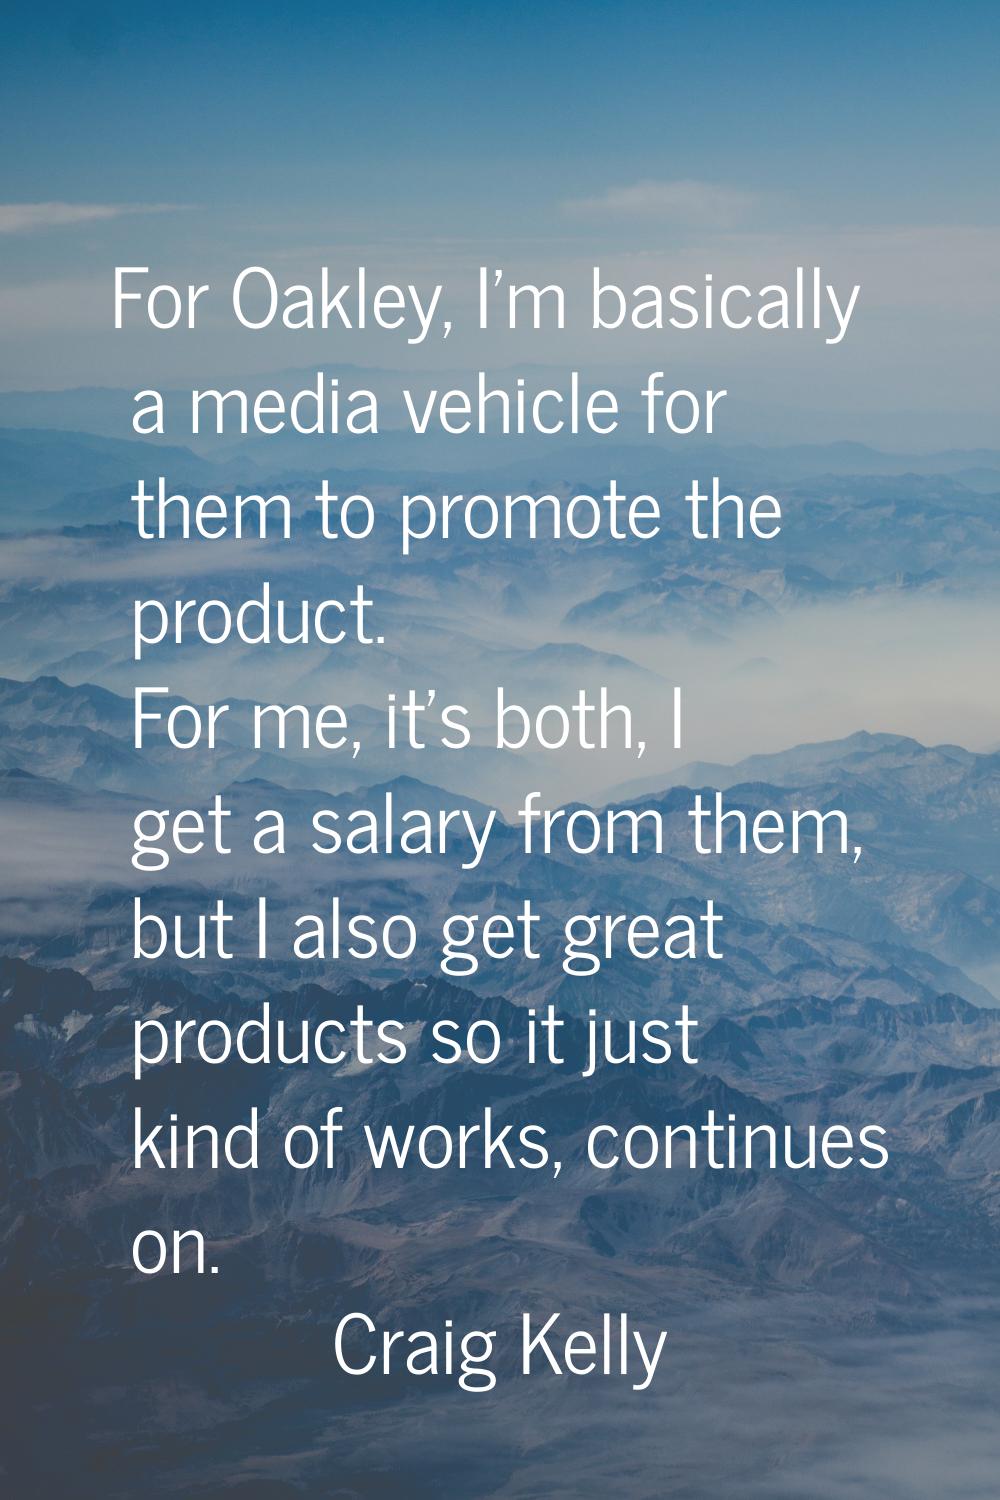 For Oakley, I'm basically a media vehicle for them to promote the product. For me, it's both, I get